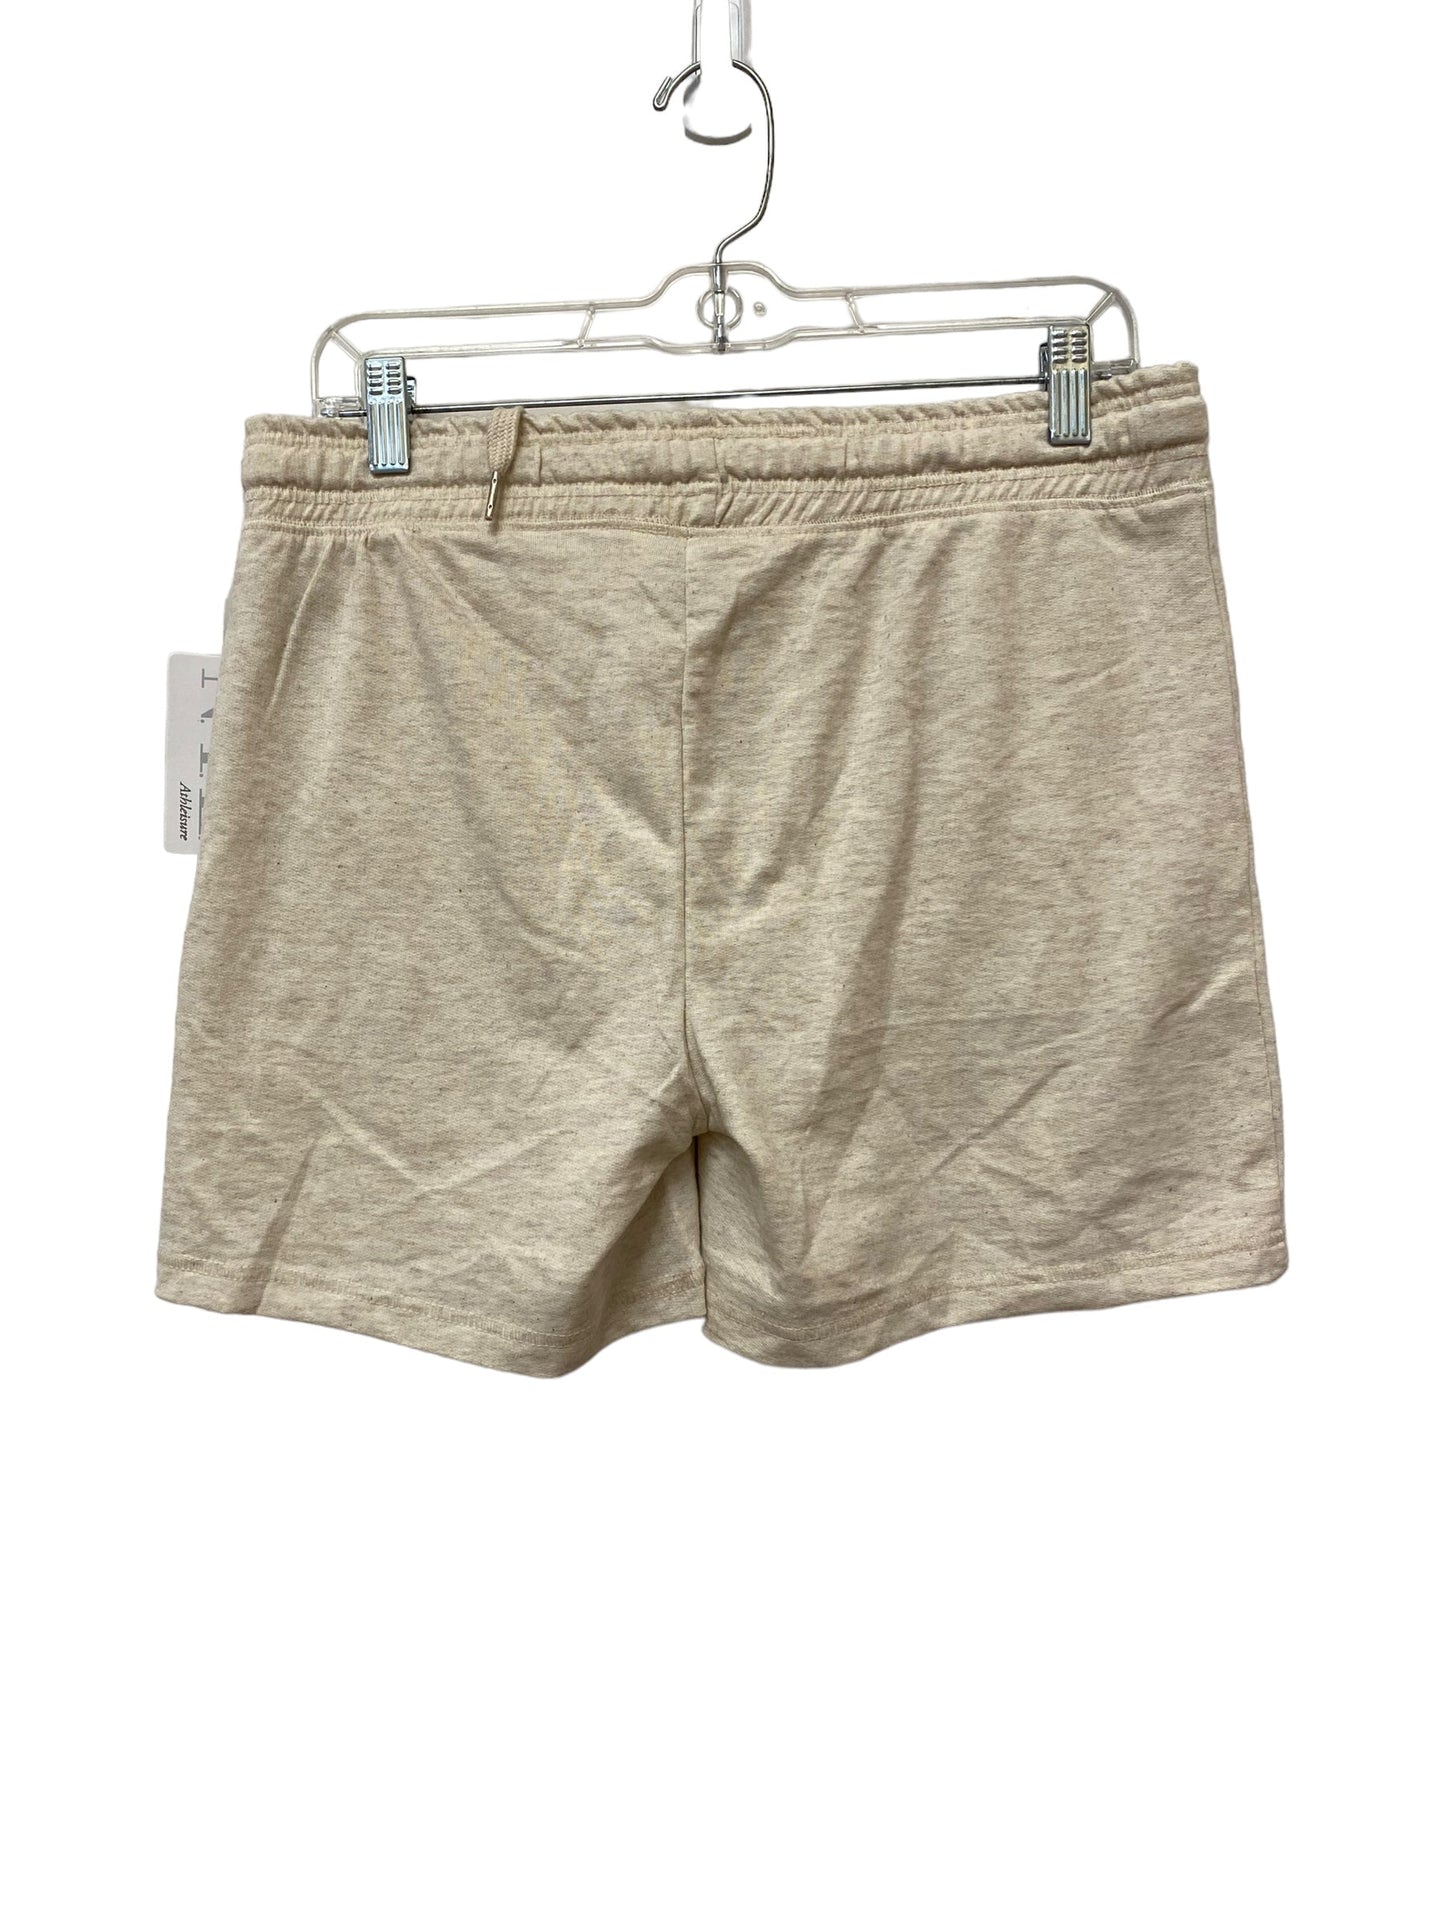 Athletic Shorts By New York Laundry  Size: M